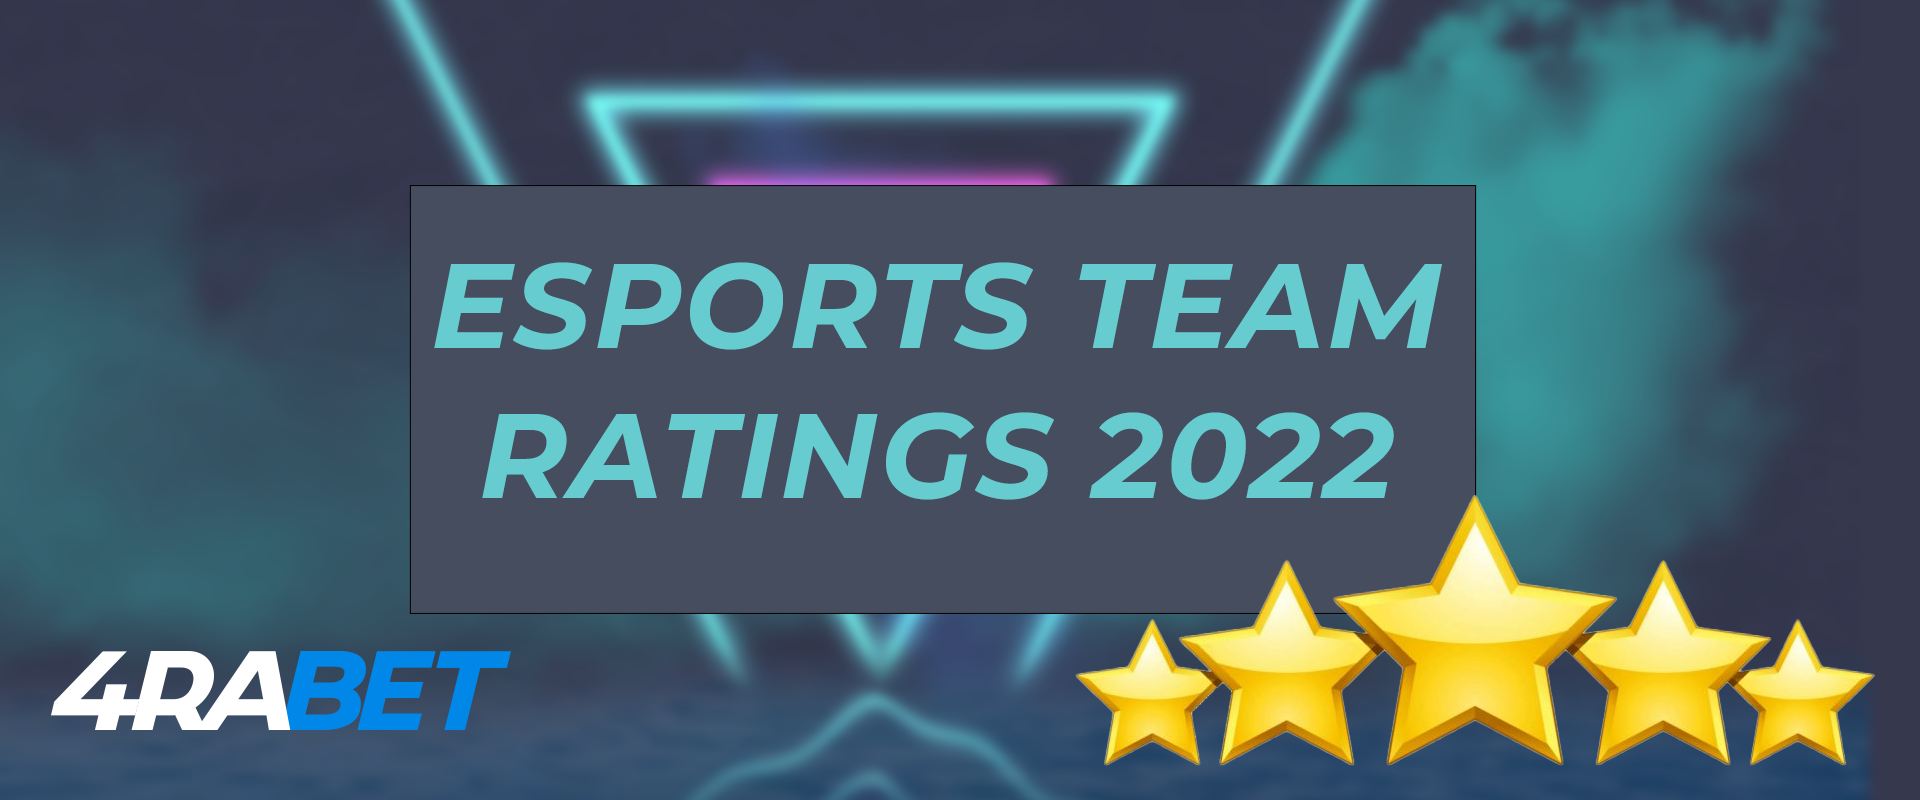 Current rating of the esport teams.